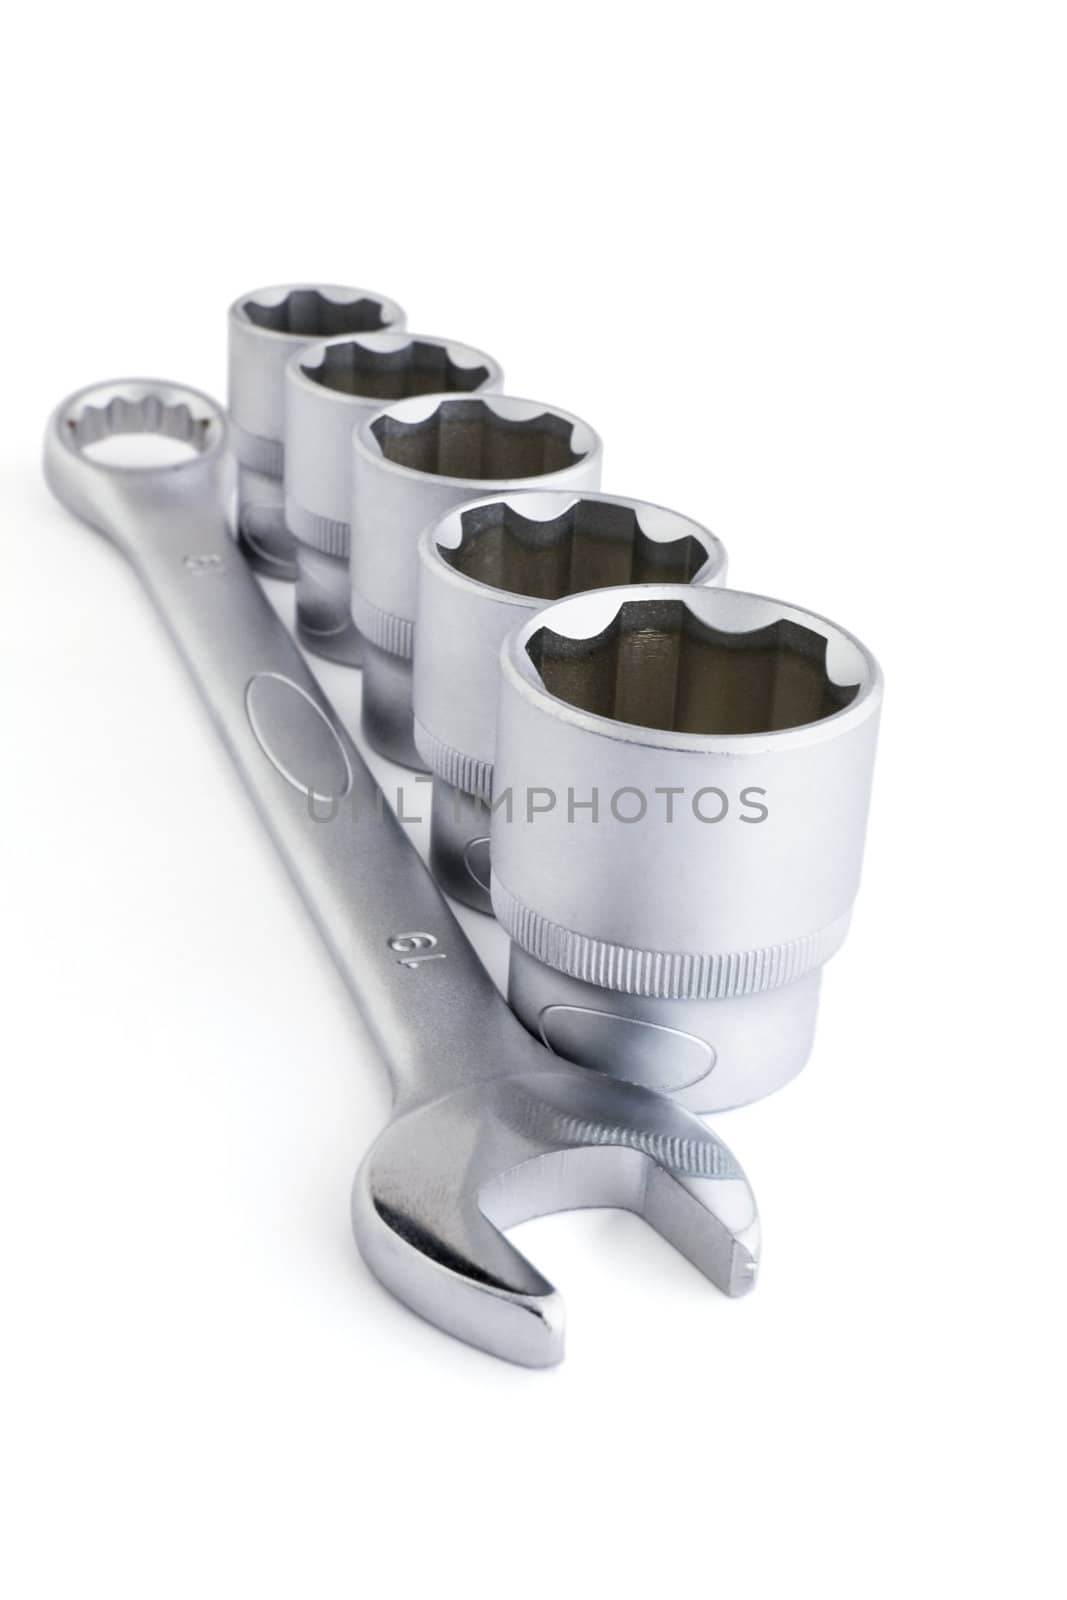 metallic wrench tools on isolated white background by Serp